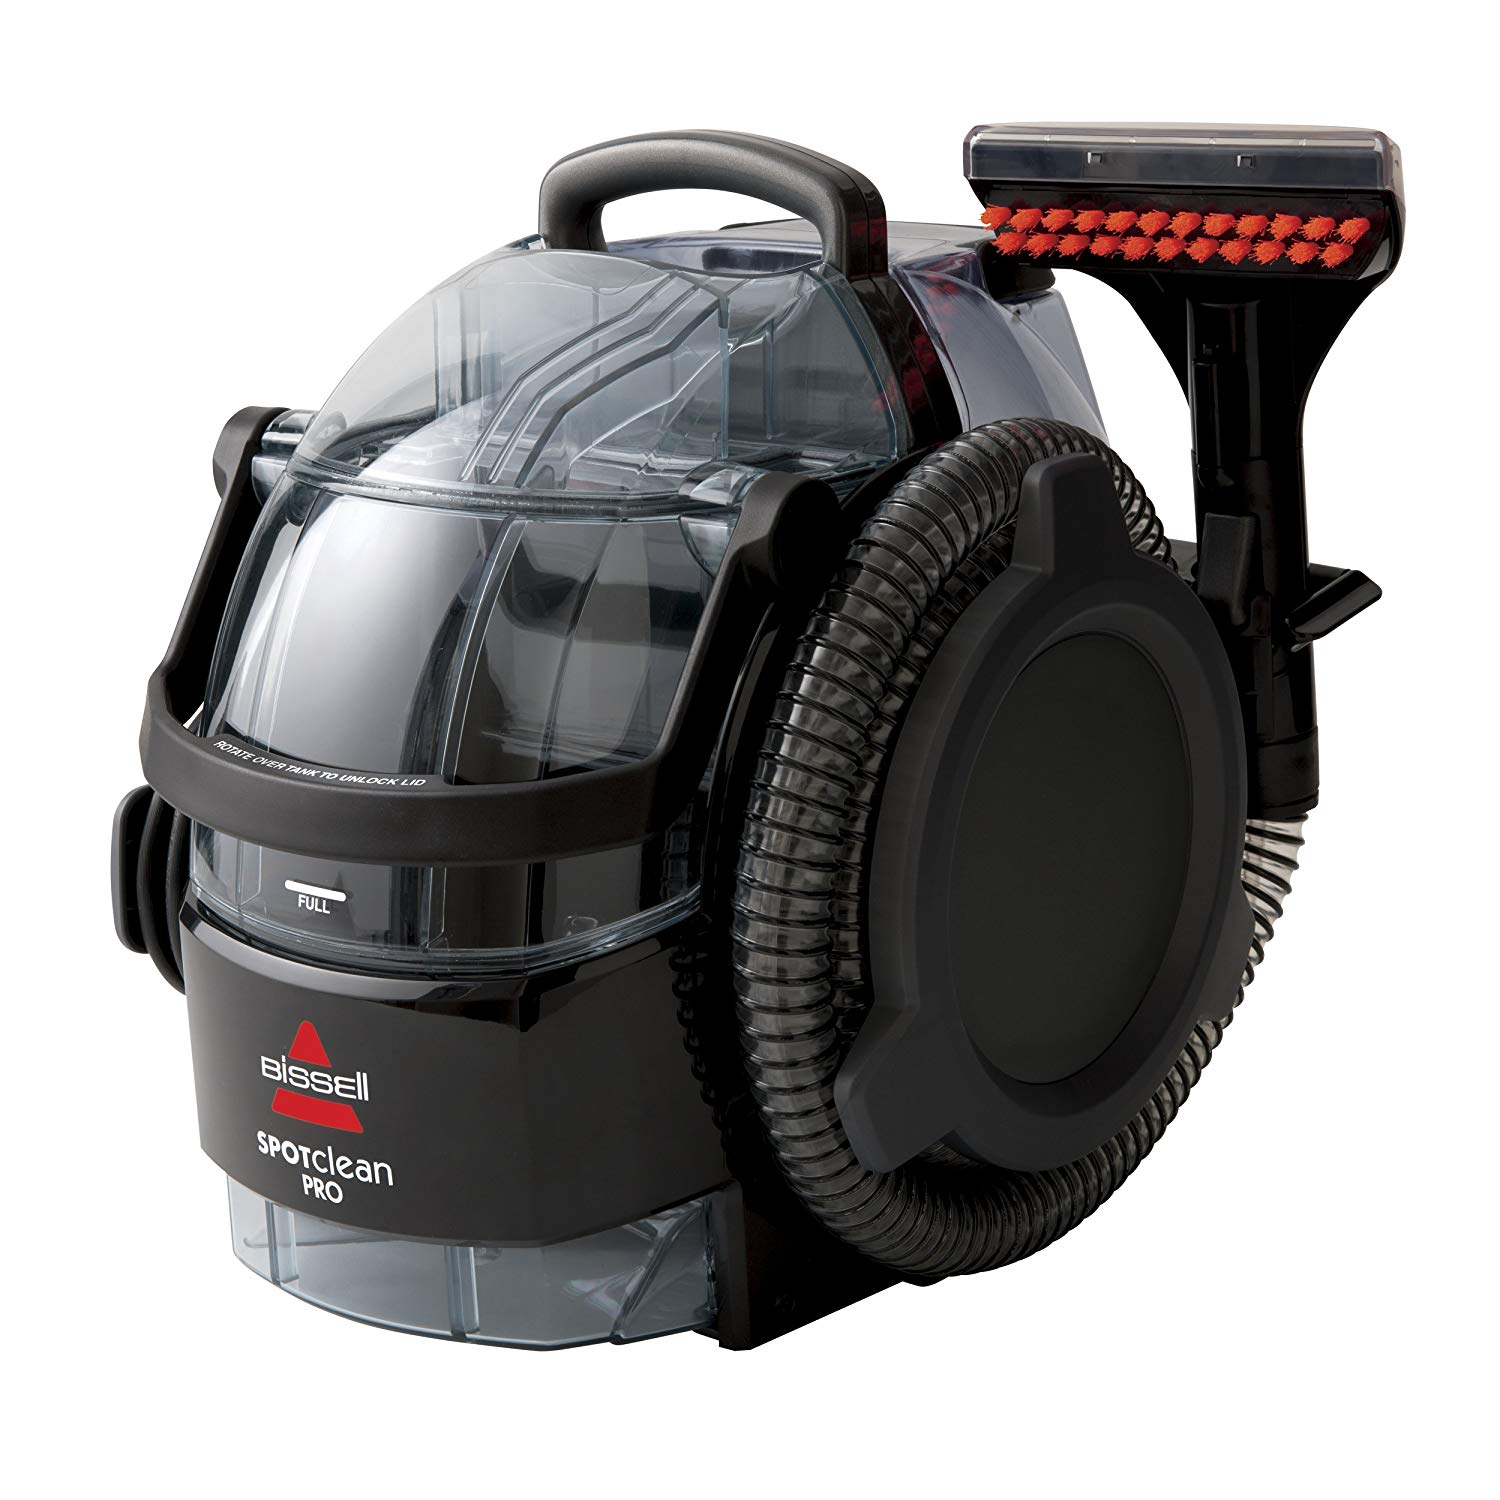 Bissell SpotClean Professional Portable Carpet Cleaner Only $99.00! (Reg $130)